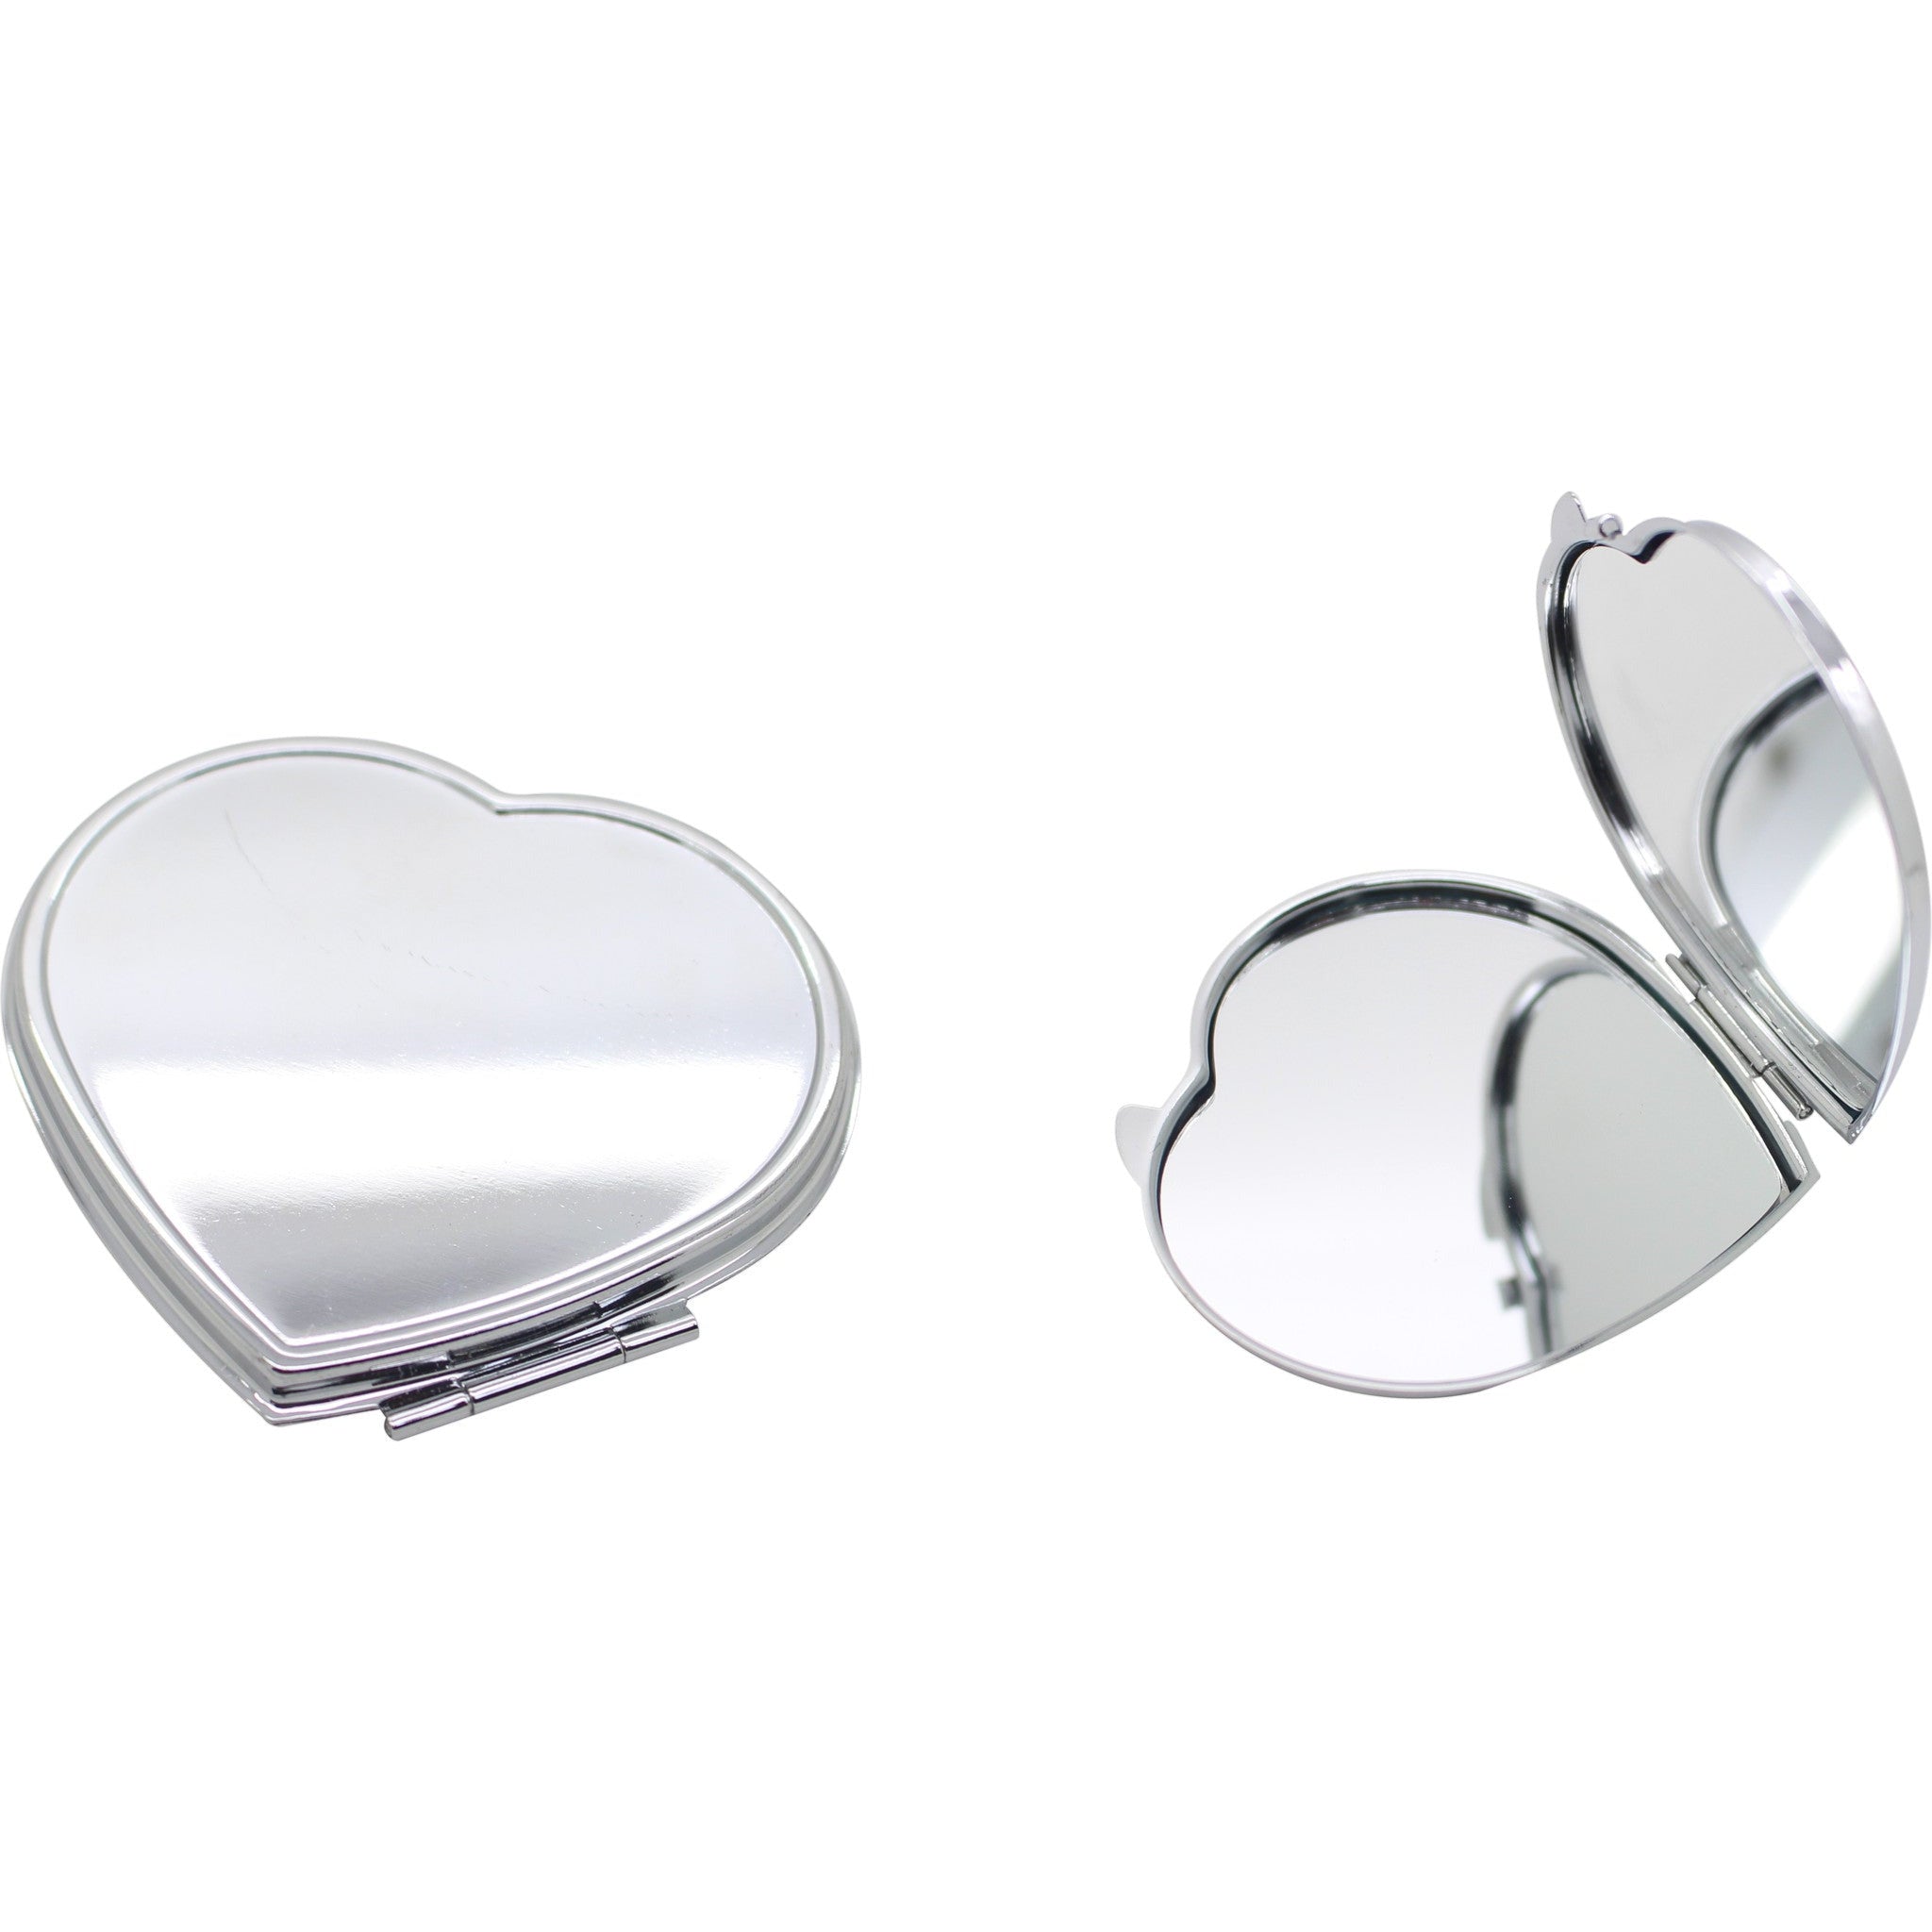 Silver Heart shaped Compact Mirror (6cm)